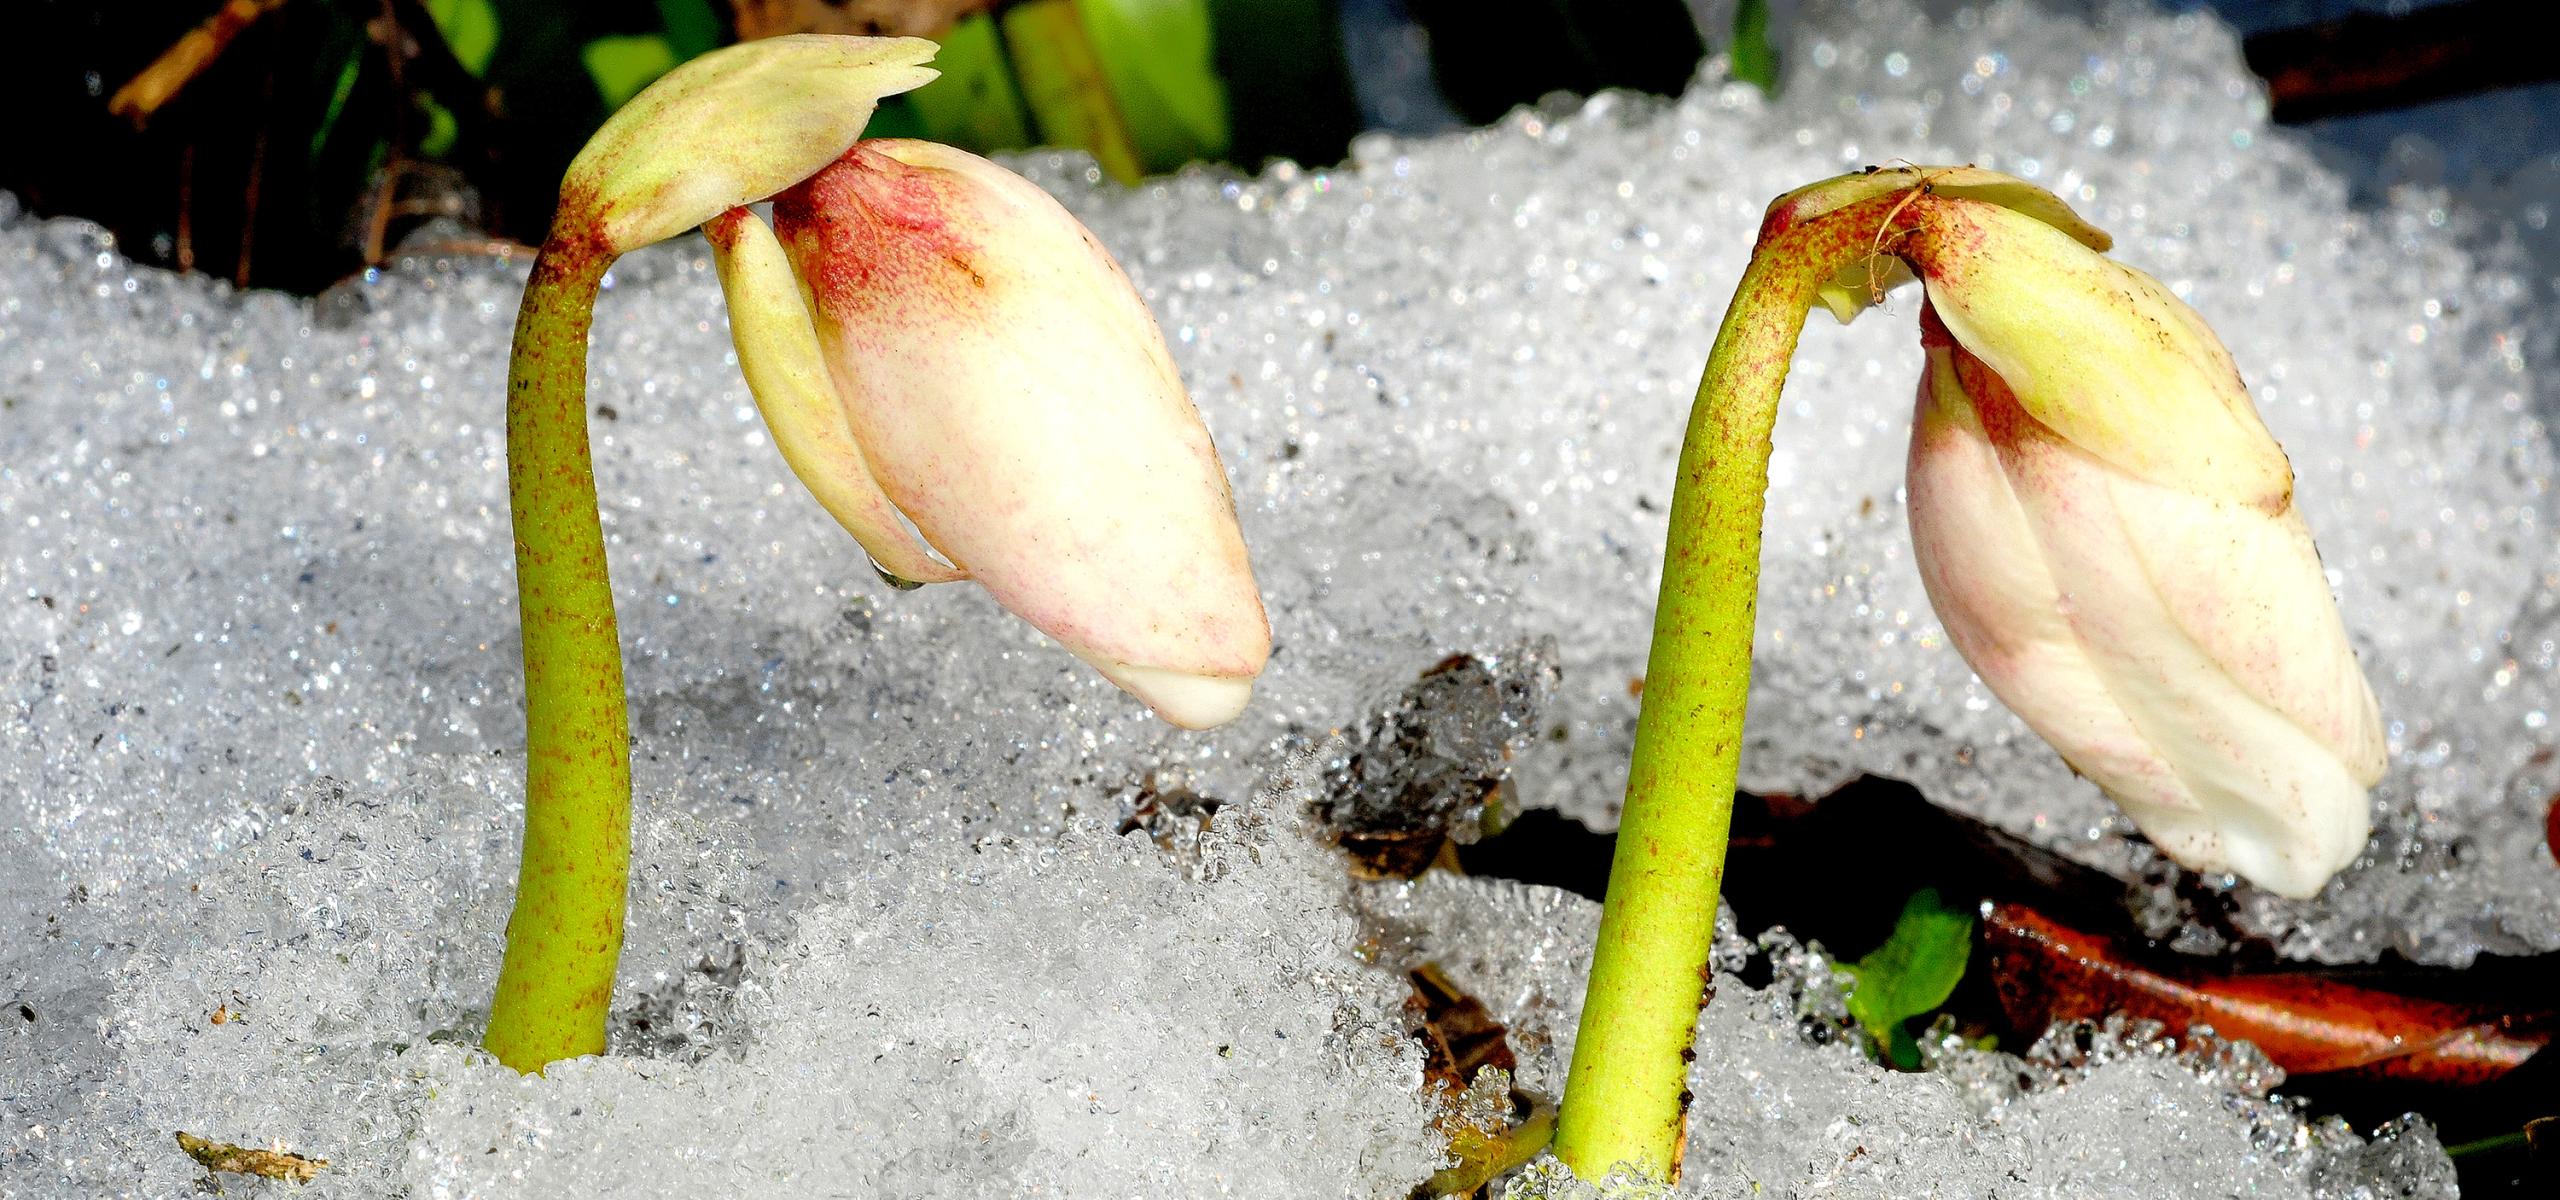 Two snow roses stick their flower buds through snow